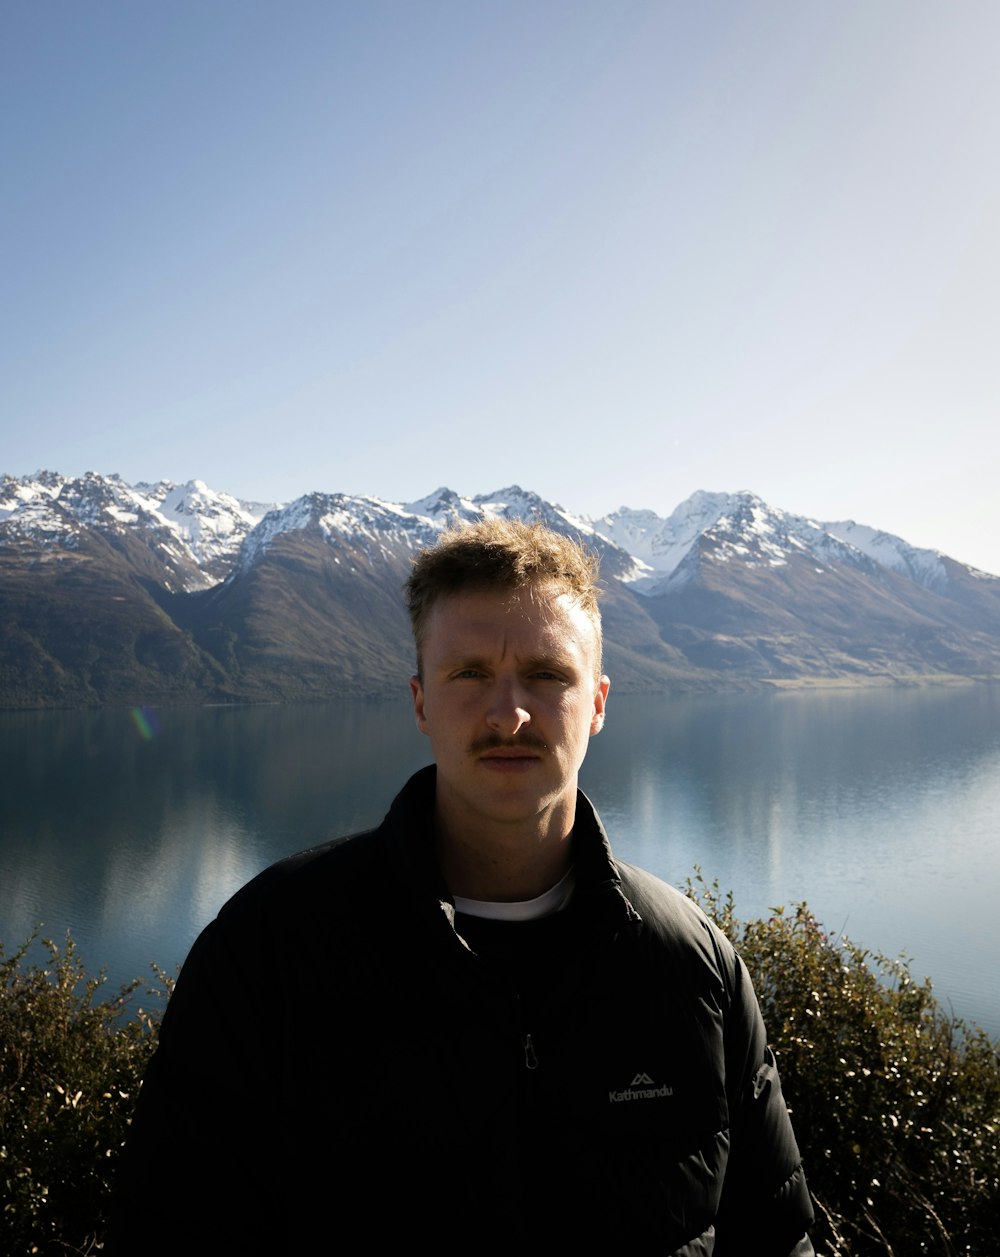 a man standing in front of a lake with mountains in the background